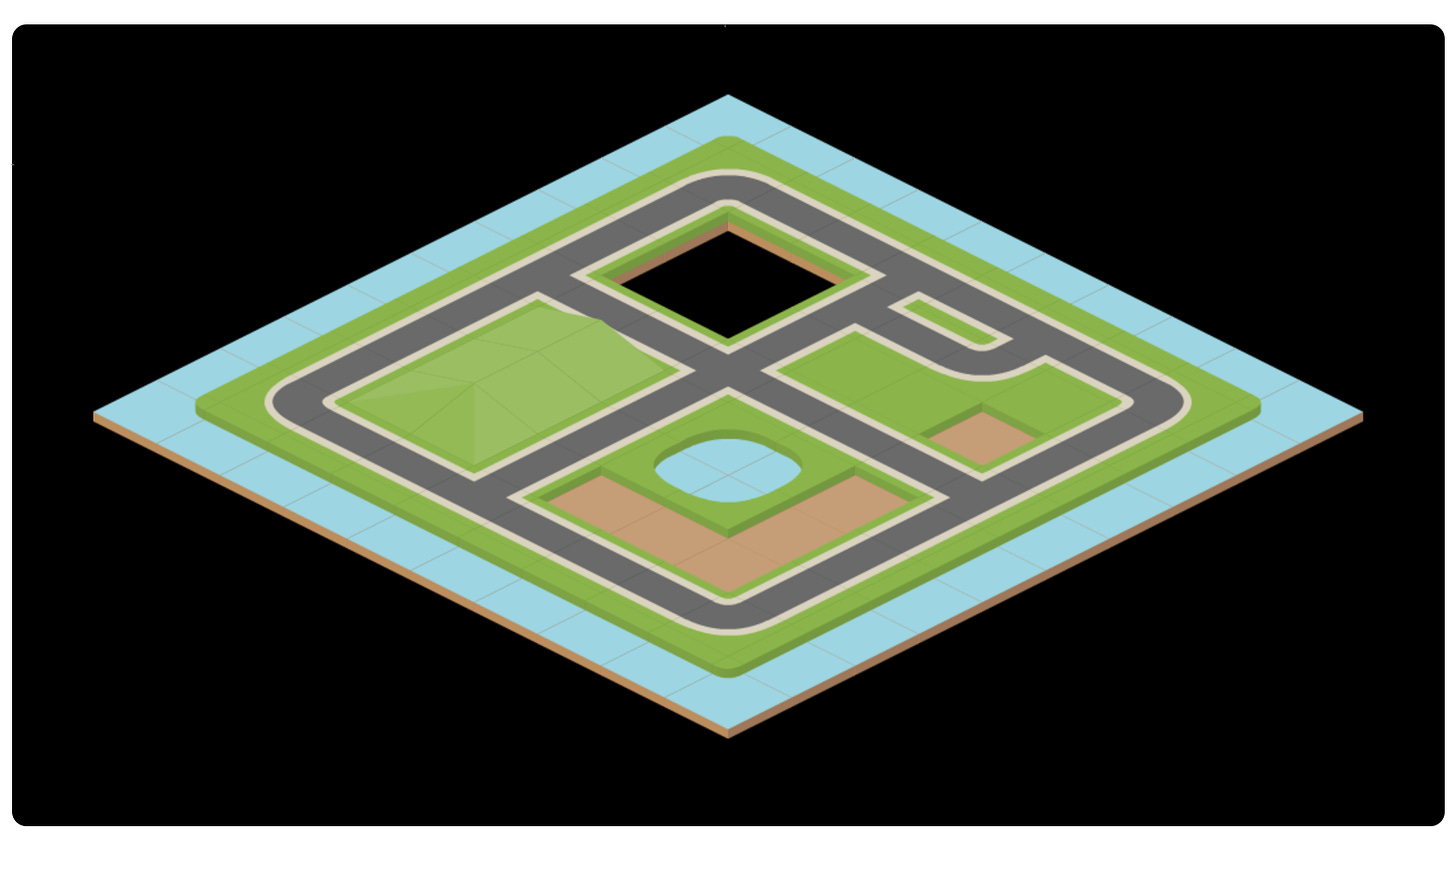 https://pikuma.com/images/blog/isometric-projection-in-games/tiles-height.png